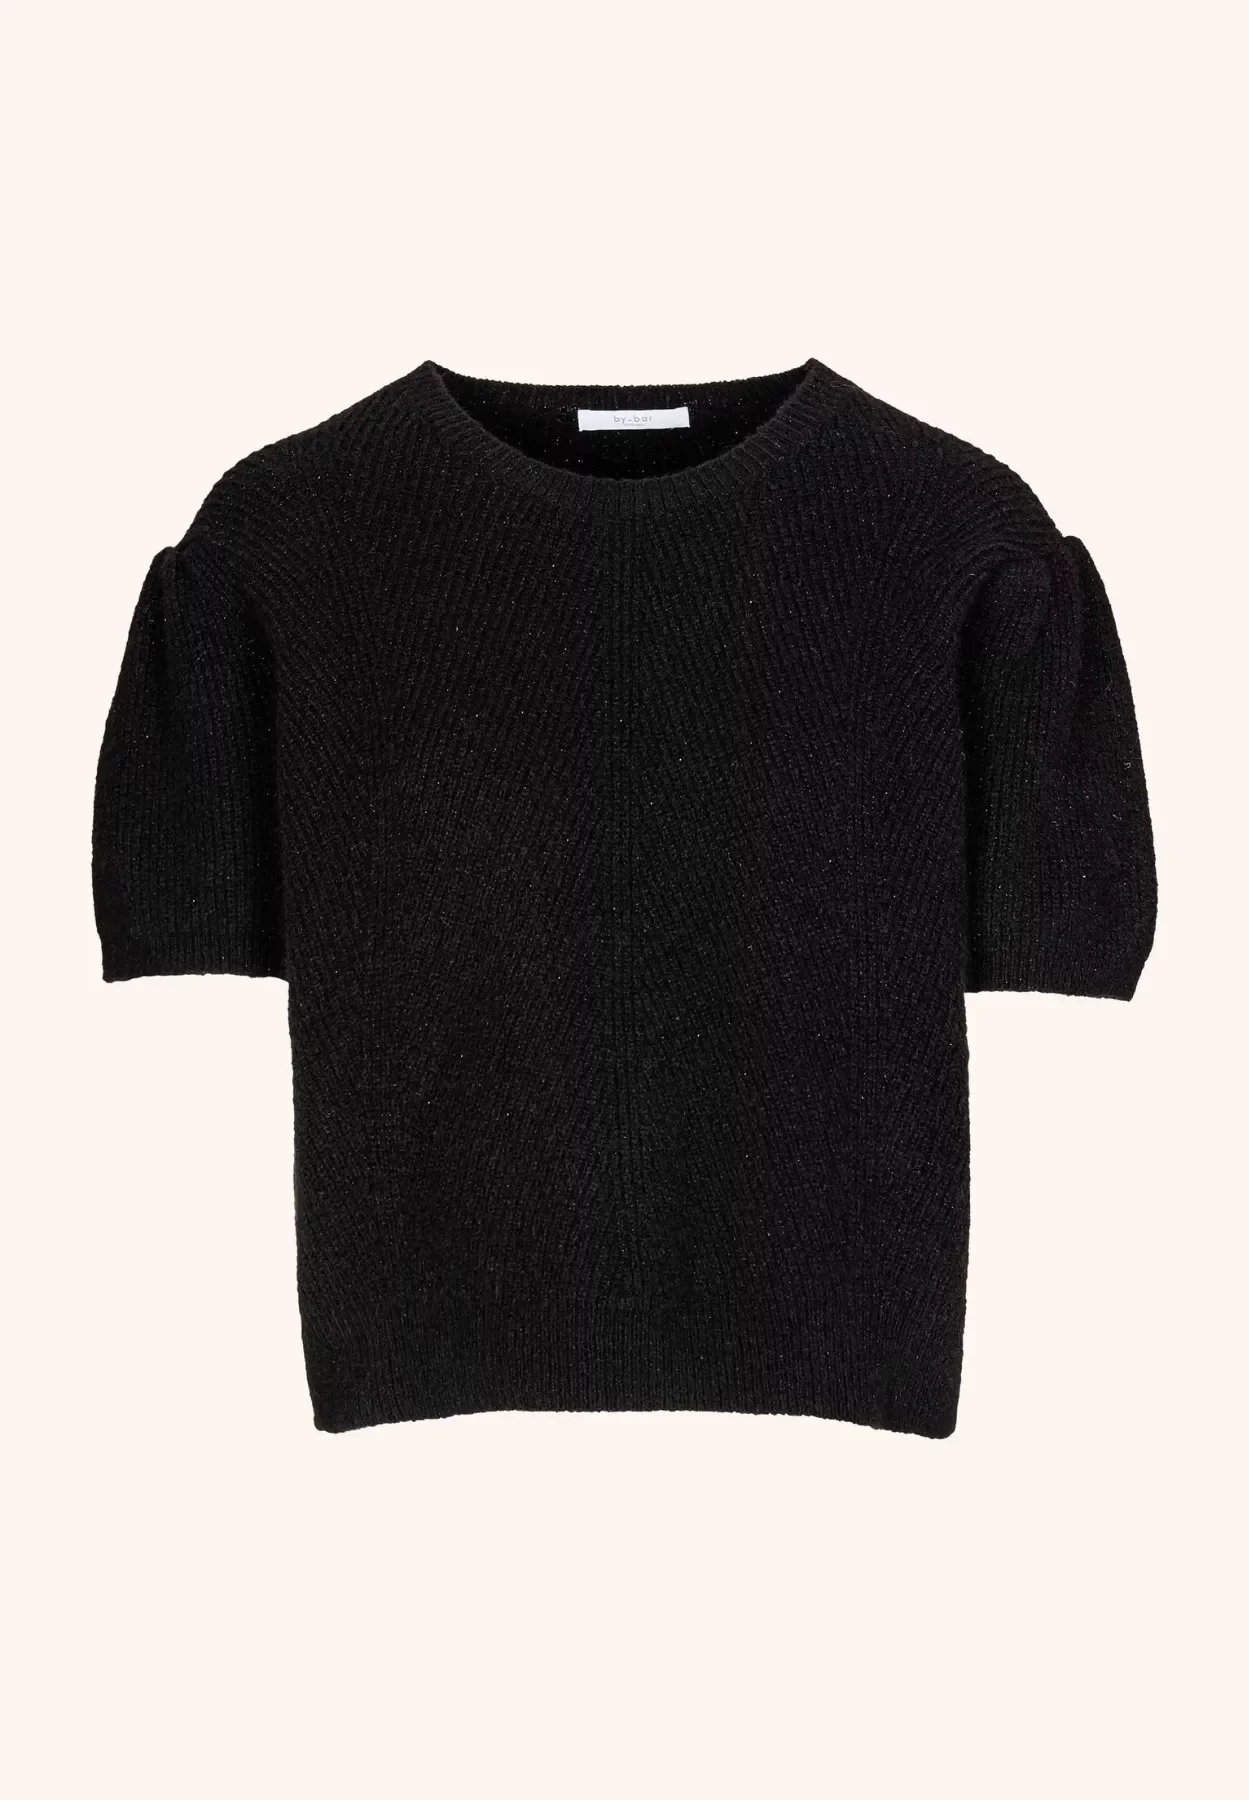 by-bar amsterdam - ilou pullover - black 6